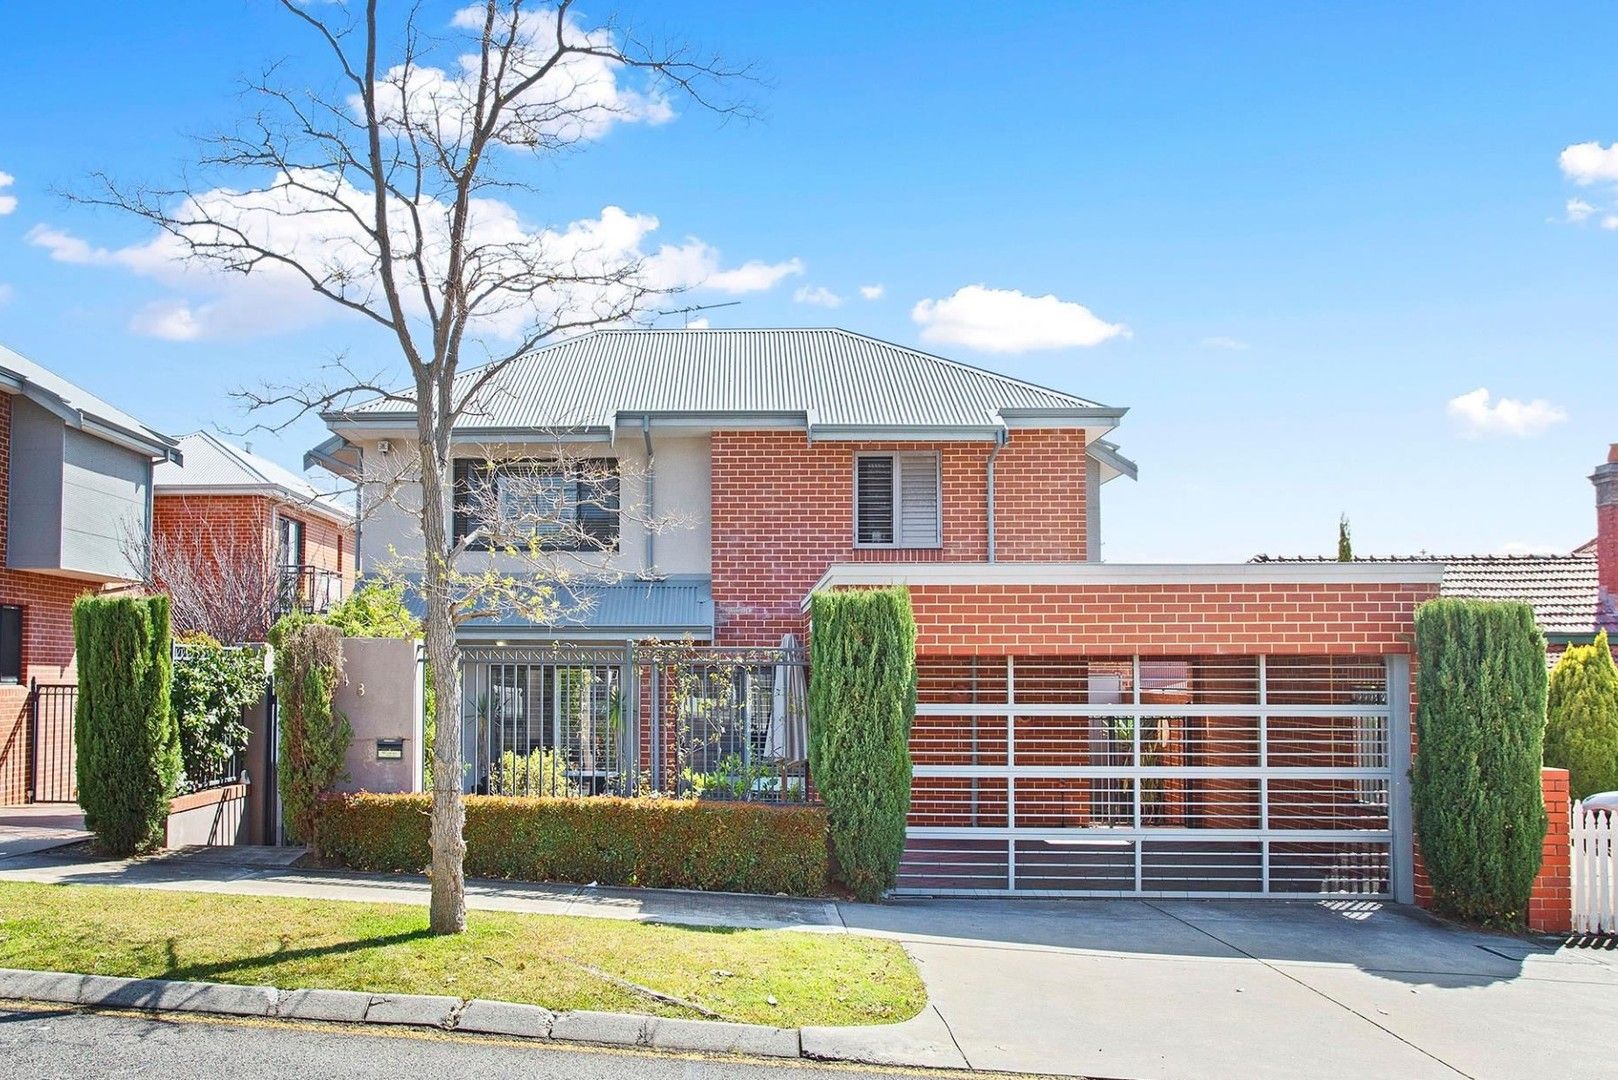 3 bedrooms Townhouse in 8/8 Menzies Street NORTH PERTH WA, 6006